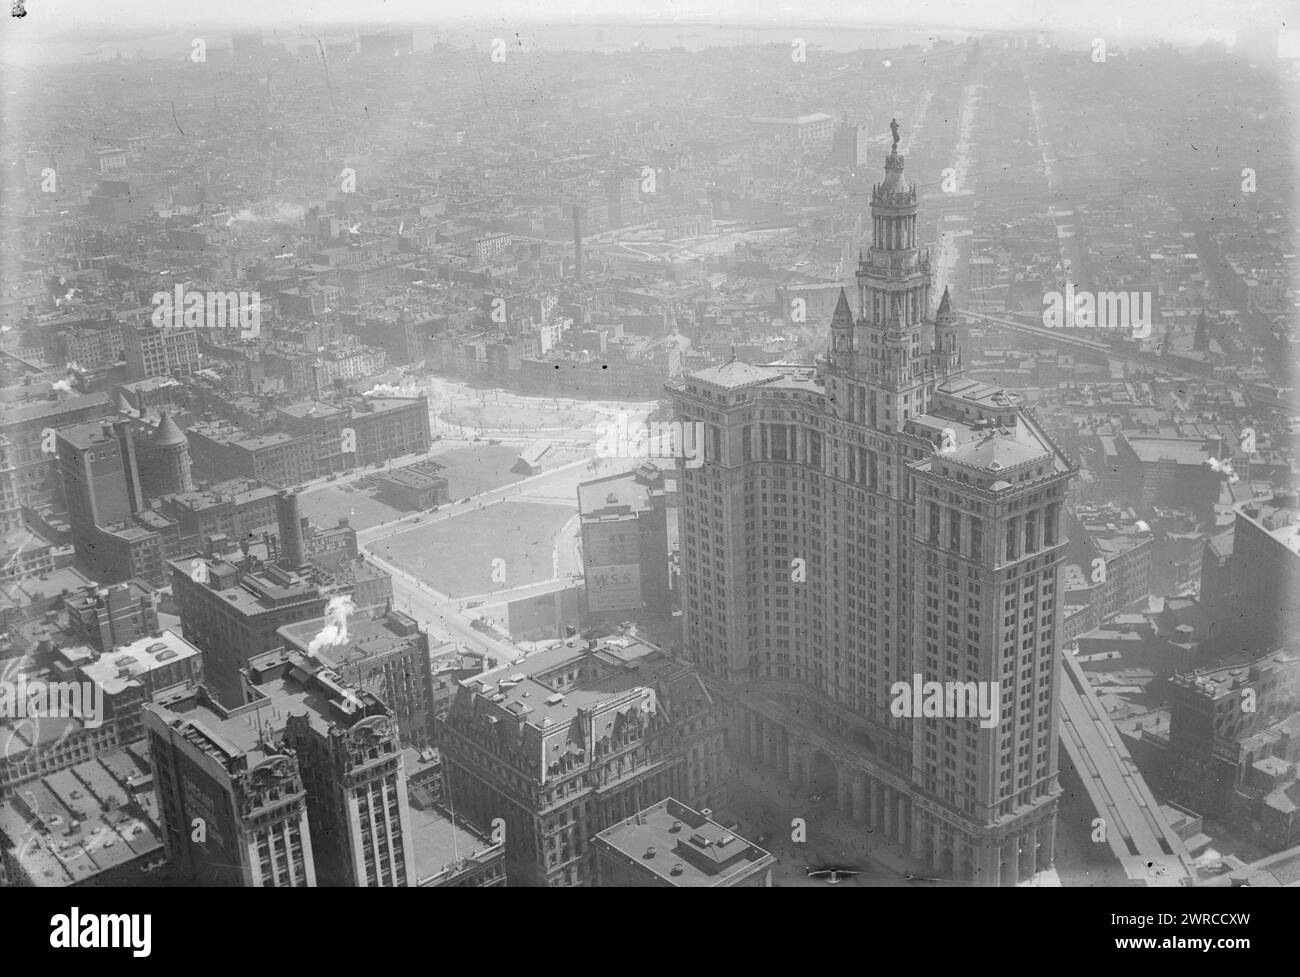 From Woolworth Bldg., Photograph shows an aerial view taken from the Woolworth Building of the David N. Dinkins Municipal Building, New York City., between ca. 1915 and ca. 1920, Glass negatives, 1 negative: glass Stock Photo